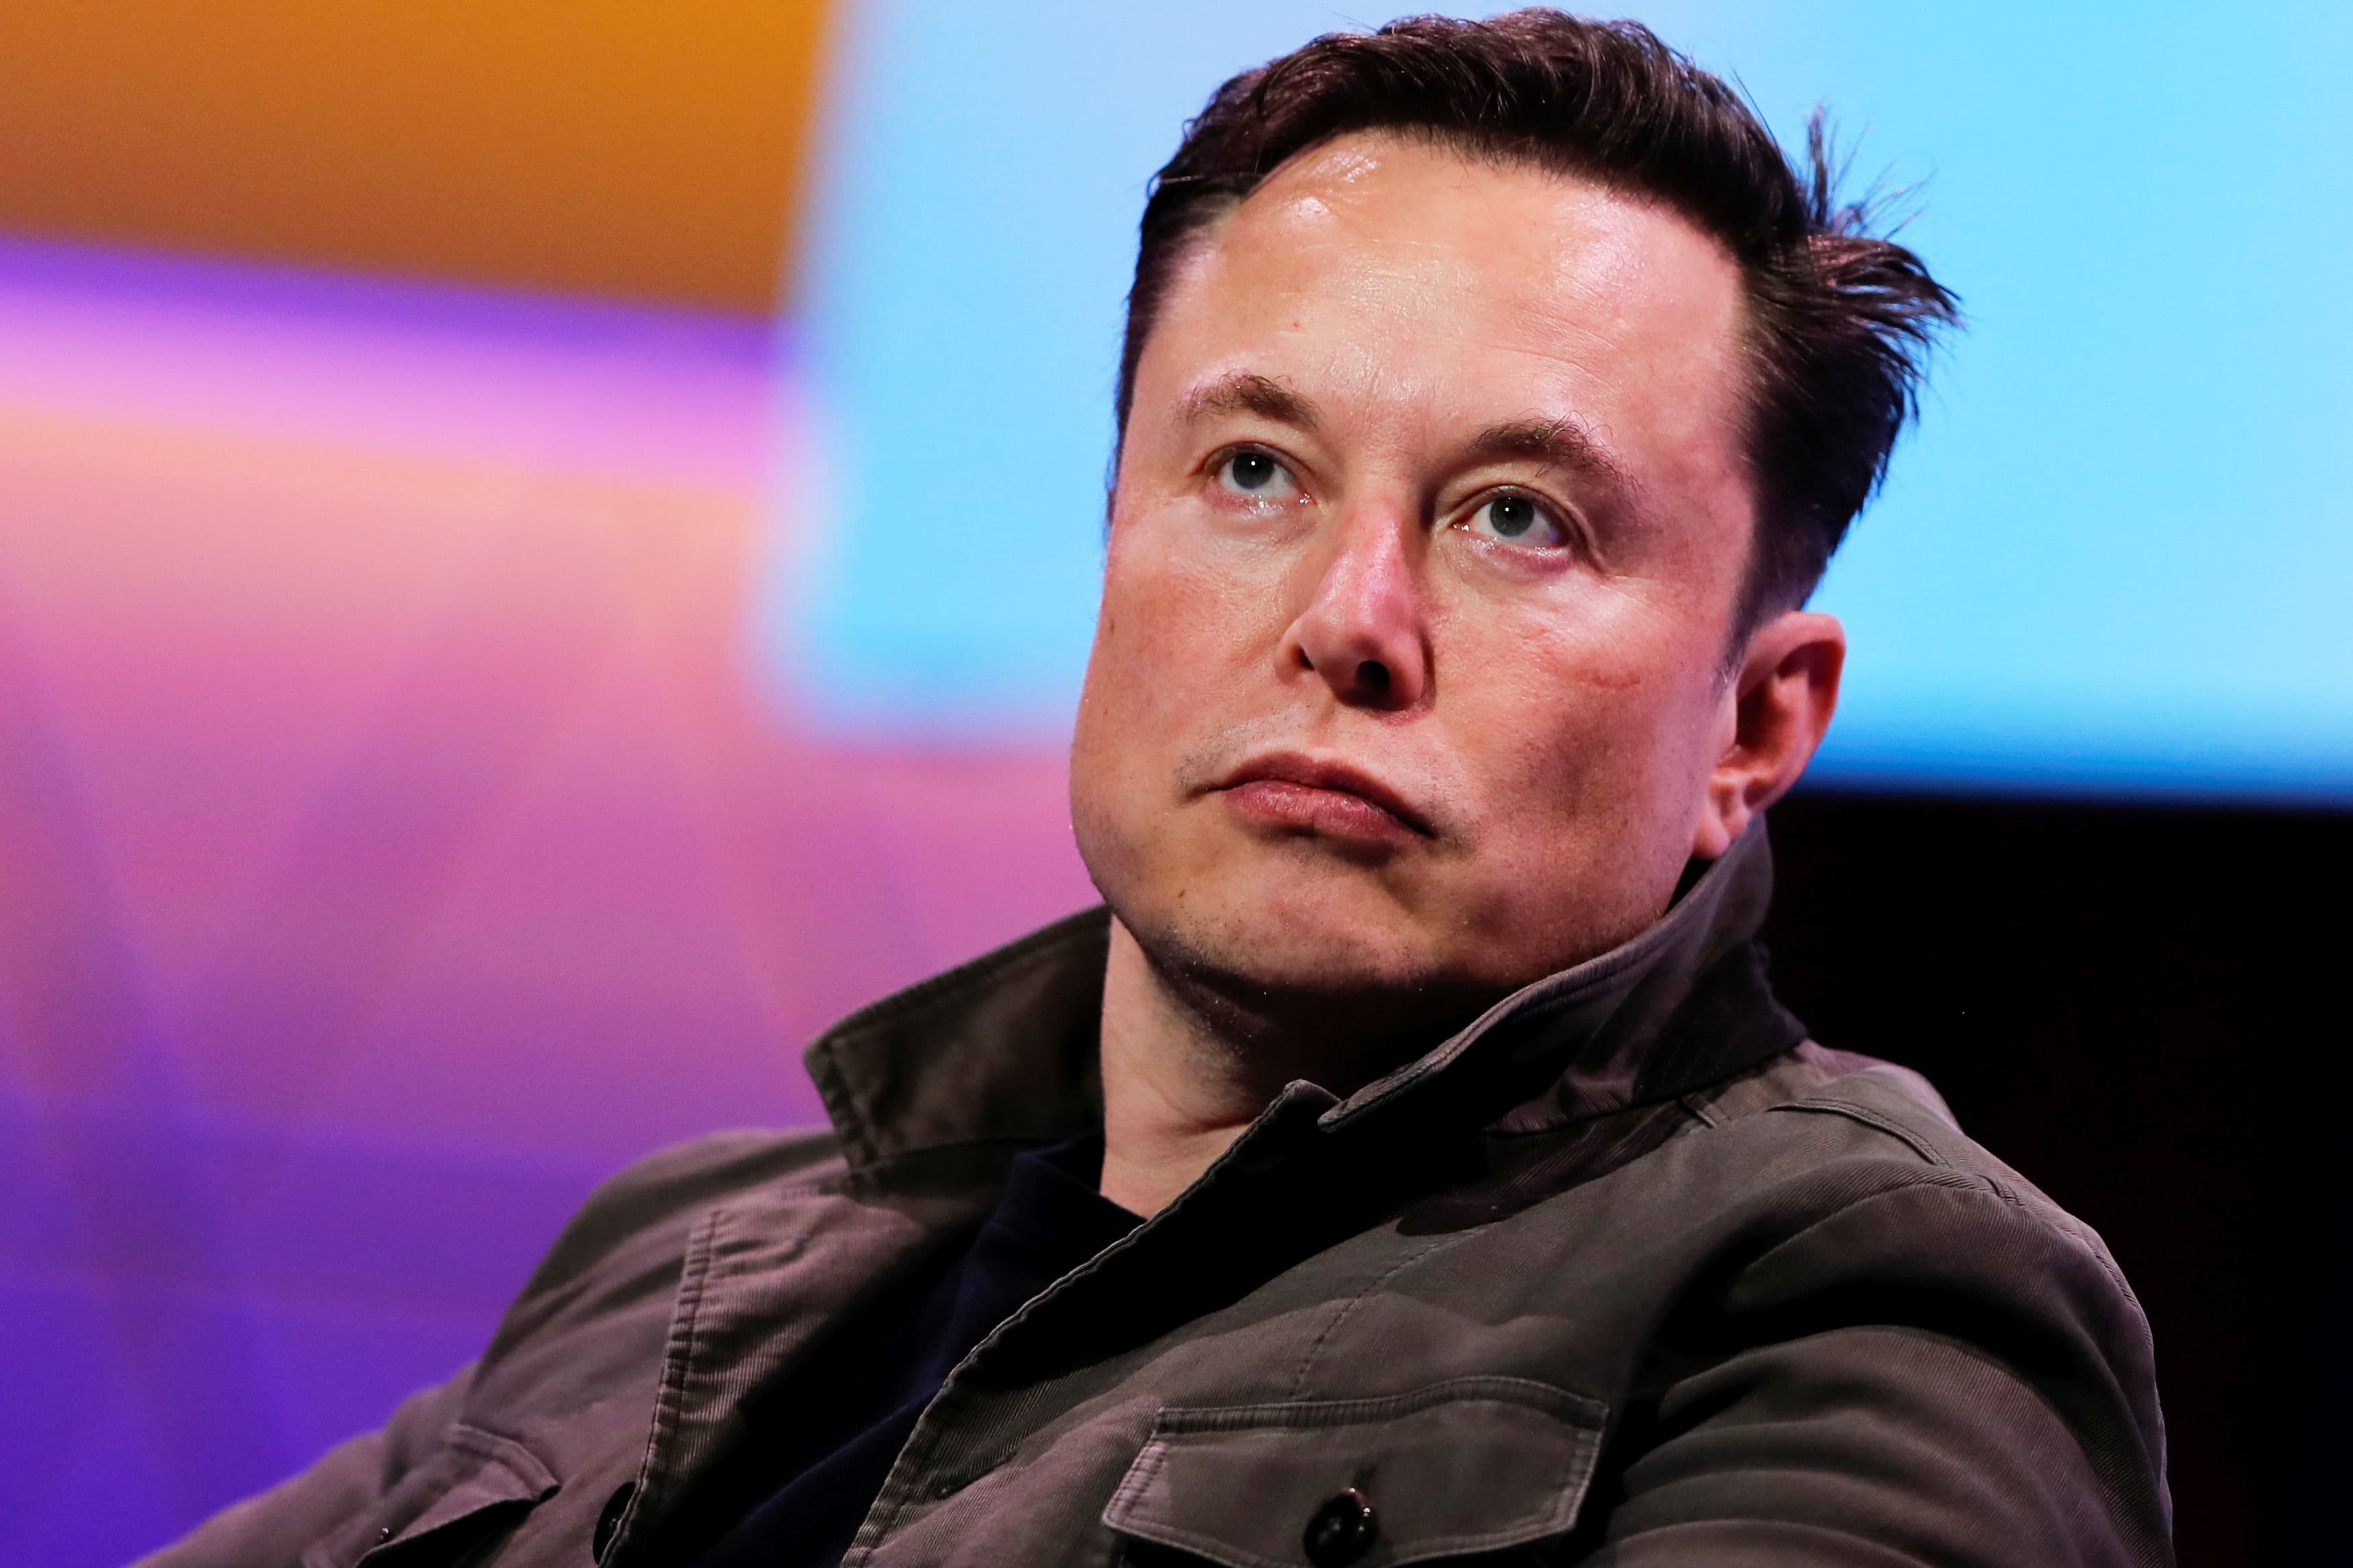 Tesla stock had its worst week in 20 months after Musk sold shares